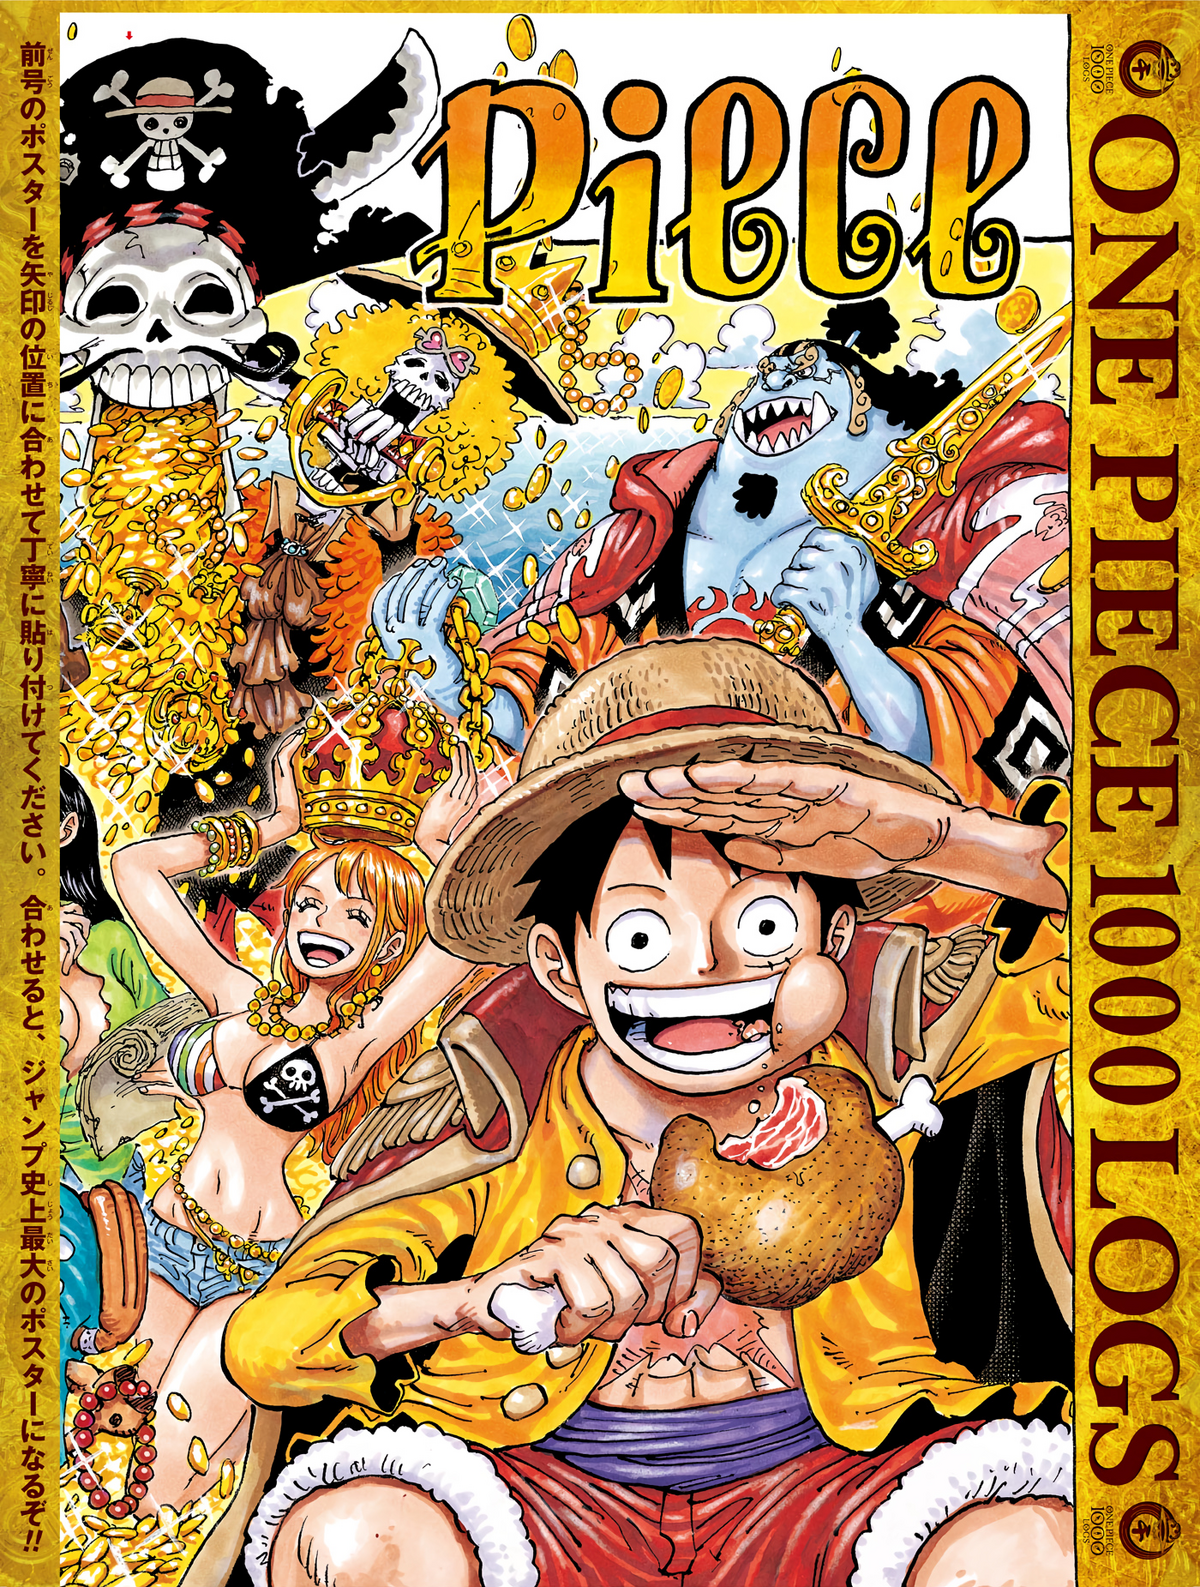 One Piece Episode 1050 Episode Guide – Release Date, Times & More